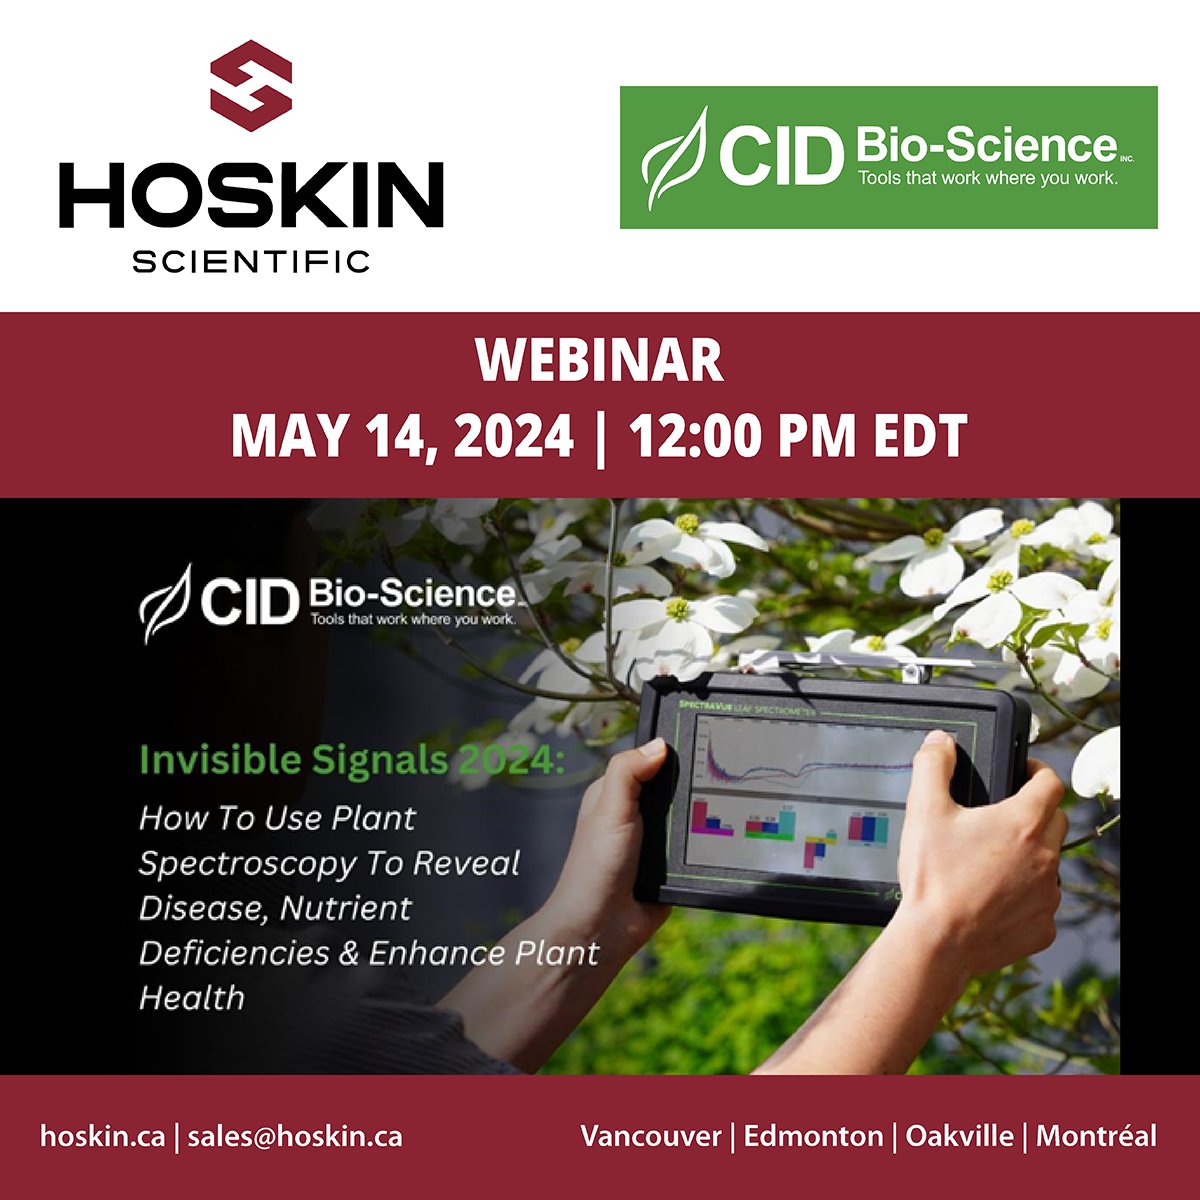 [ UPCOMING WEBINAR ]
Invisible Signals 2024: 
How To Use Plant Spectroscopy To Reveal Disease, Nutrient Deficiencies & Enhance Plant Health
ow.ly/WoBh50RAk4i
#planthealth #plantdisease #spectroscopy #cidbioscience